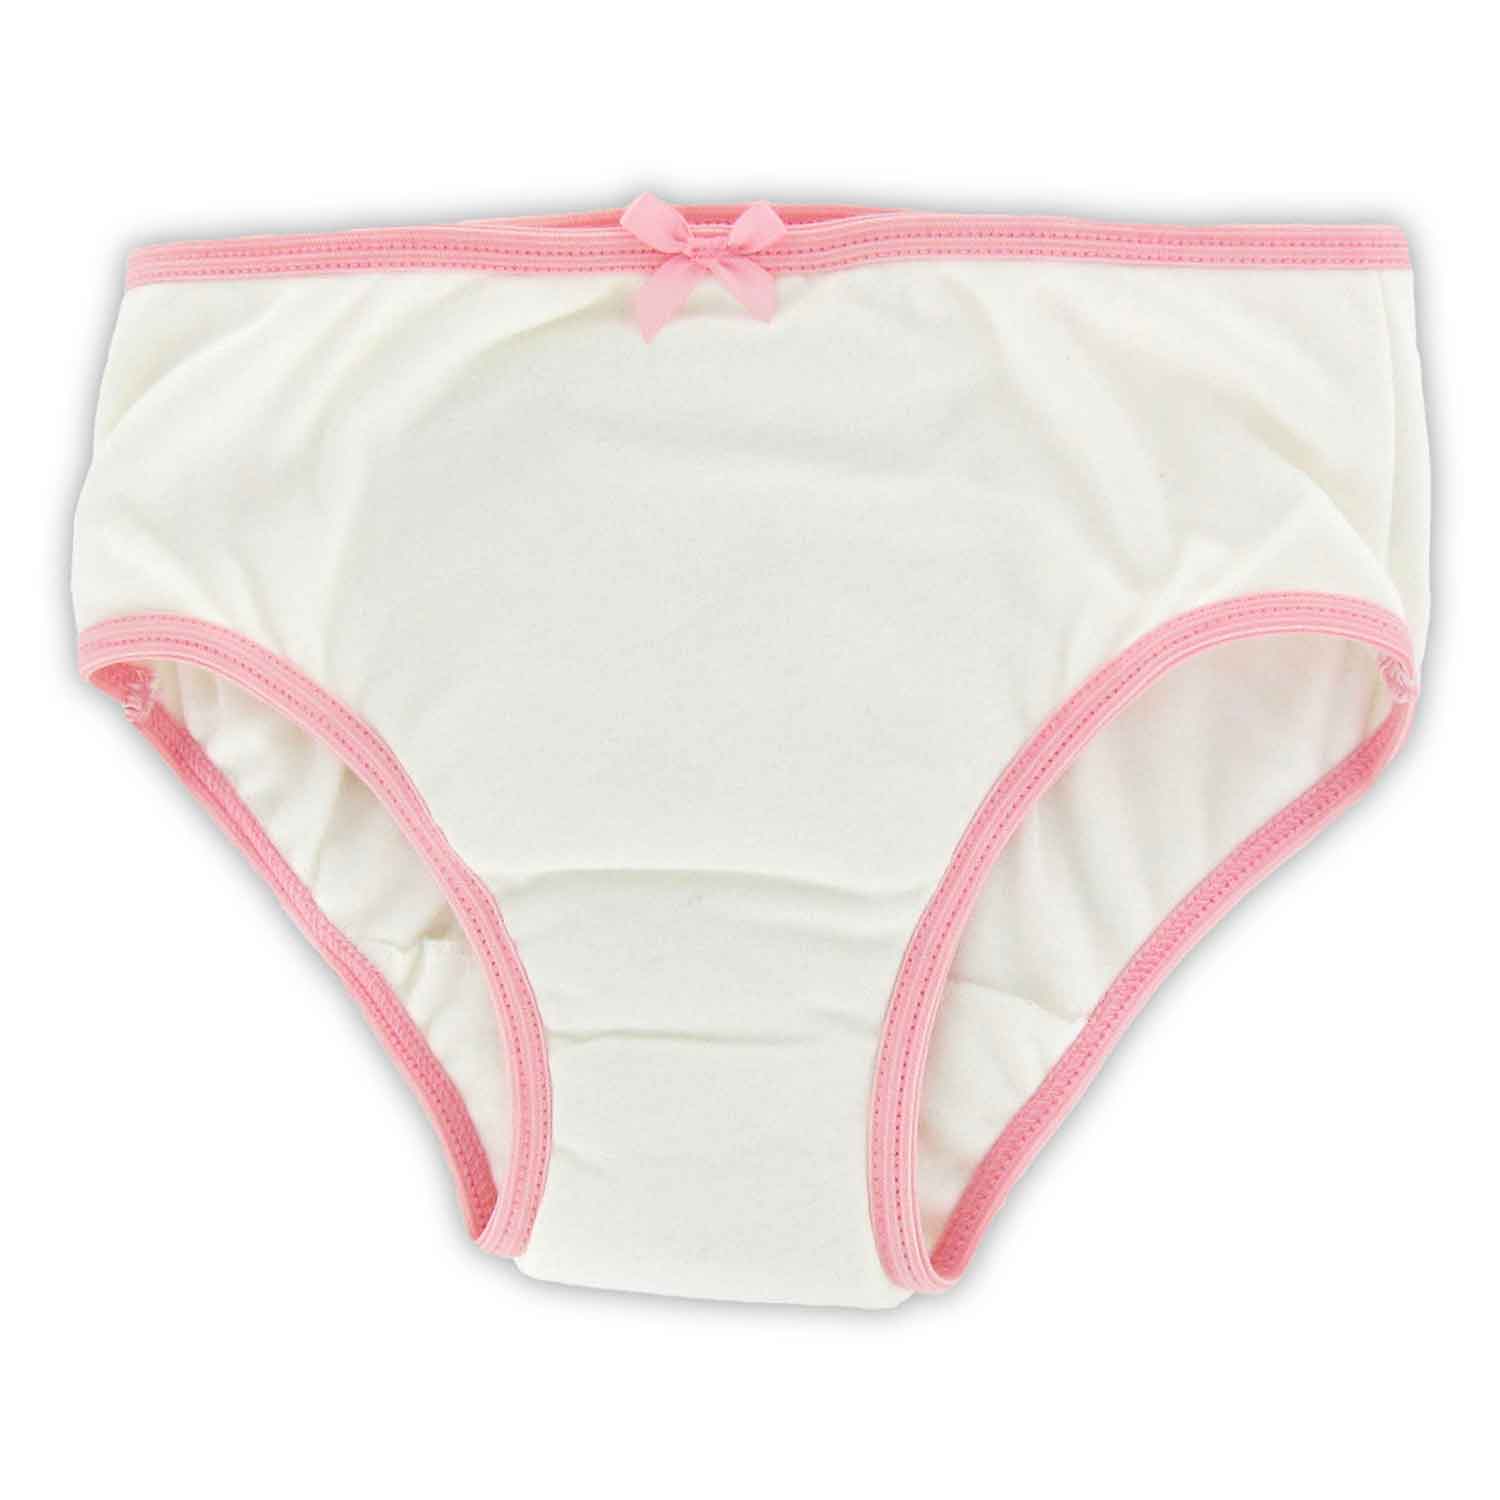 Disposable Youth Absorbent Underwear: Bedwetting Store